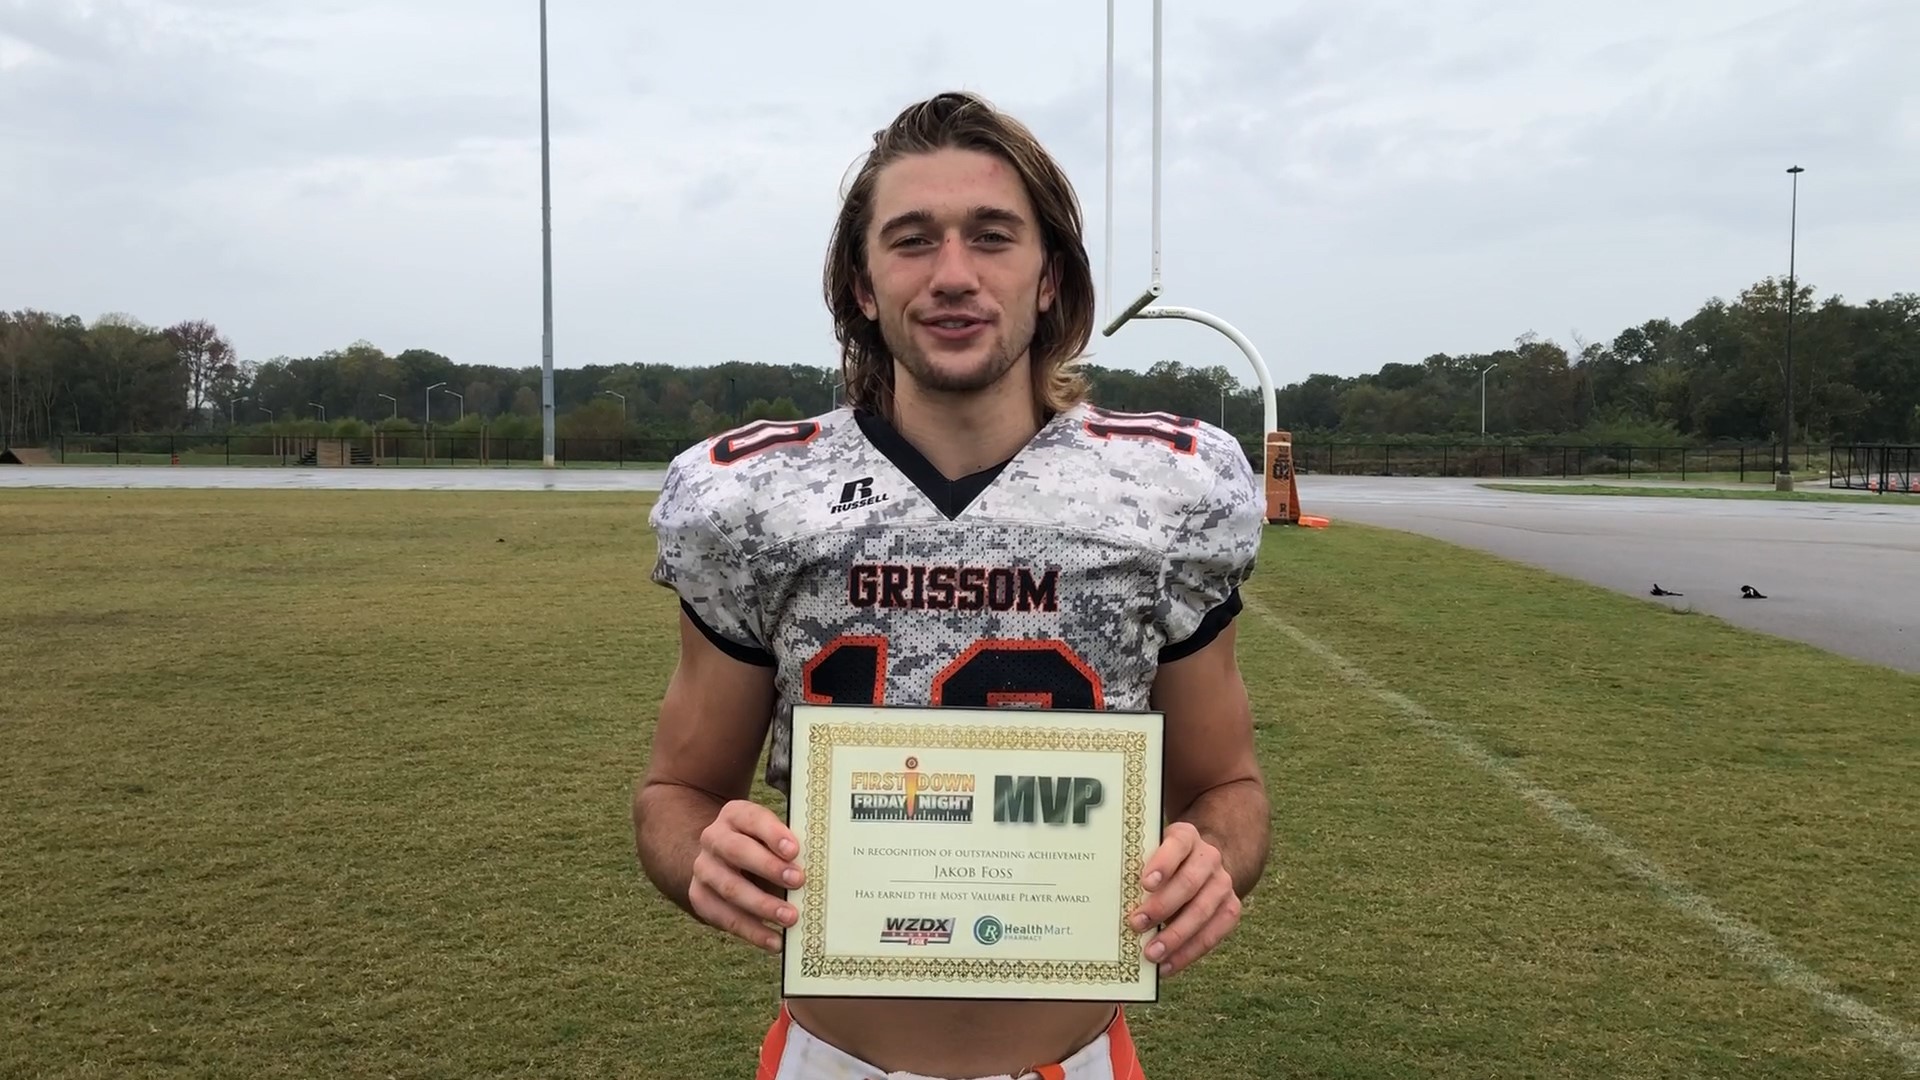 Grissom quarterback helped lead his team to the playoffs for the first time since 2004.